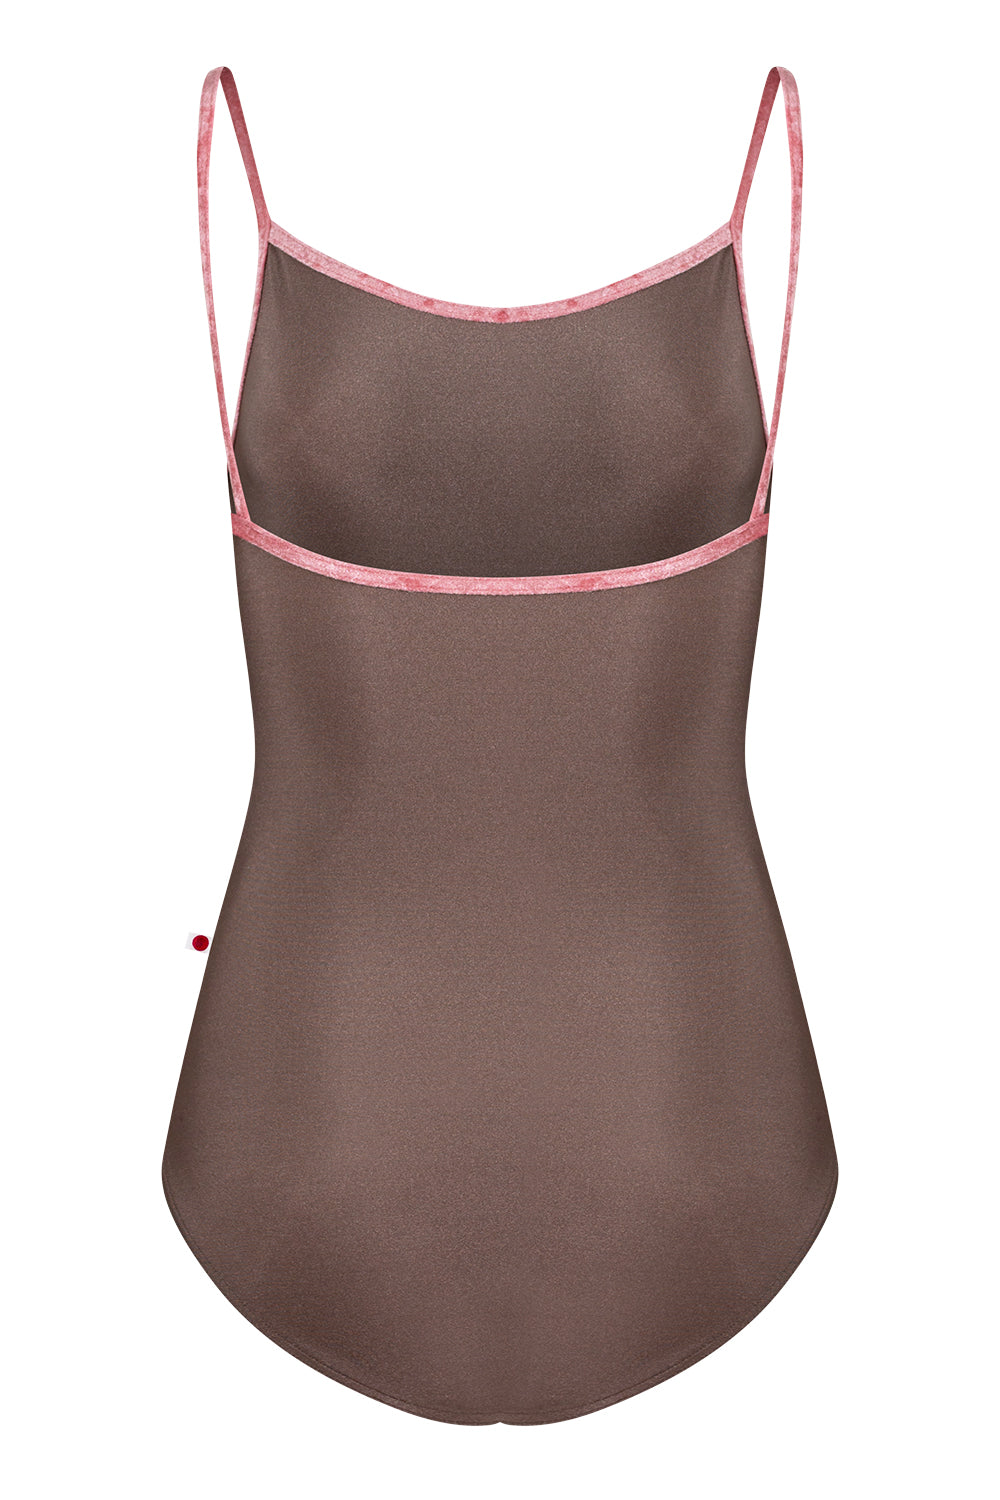 Marisa leotard in N-Star body color with CV-Romance trim color